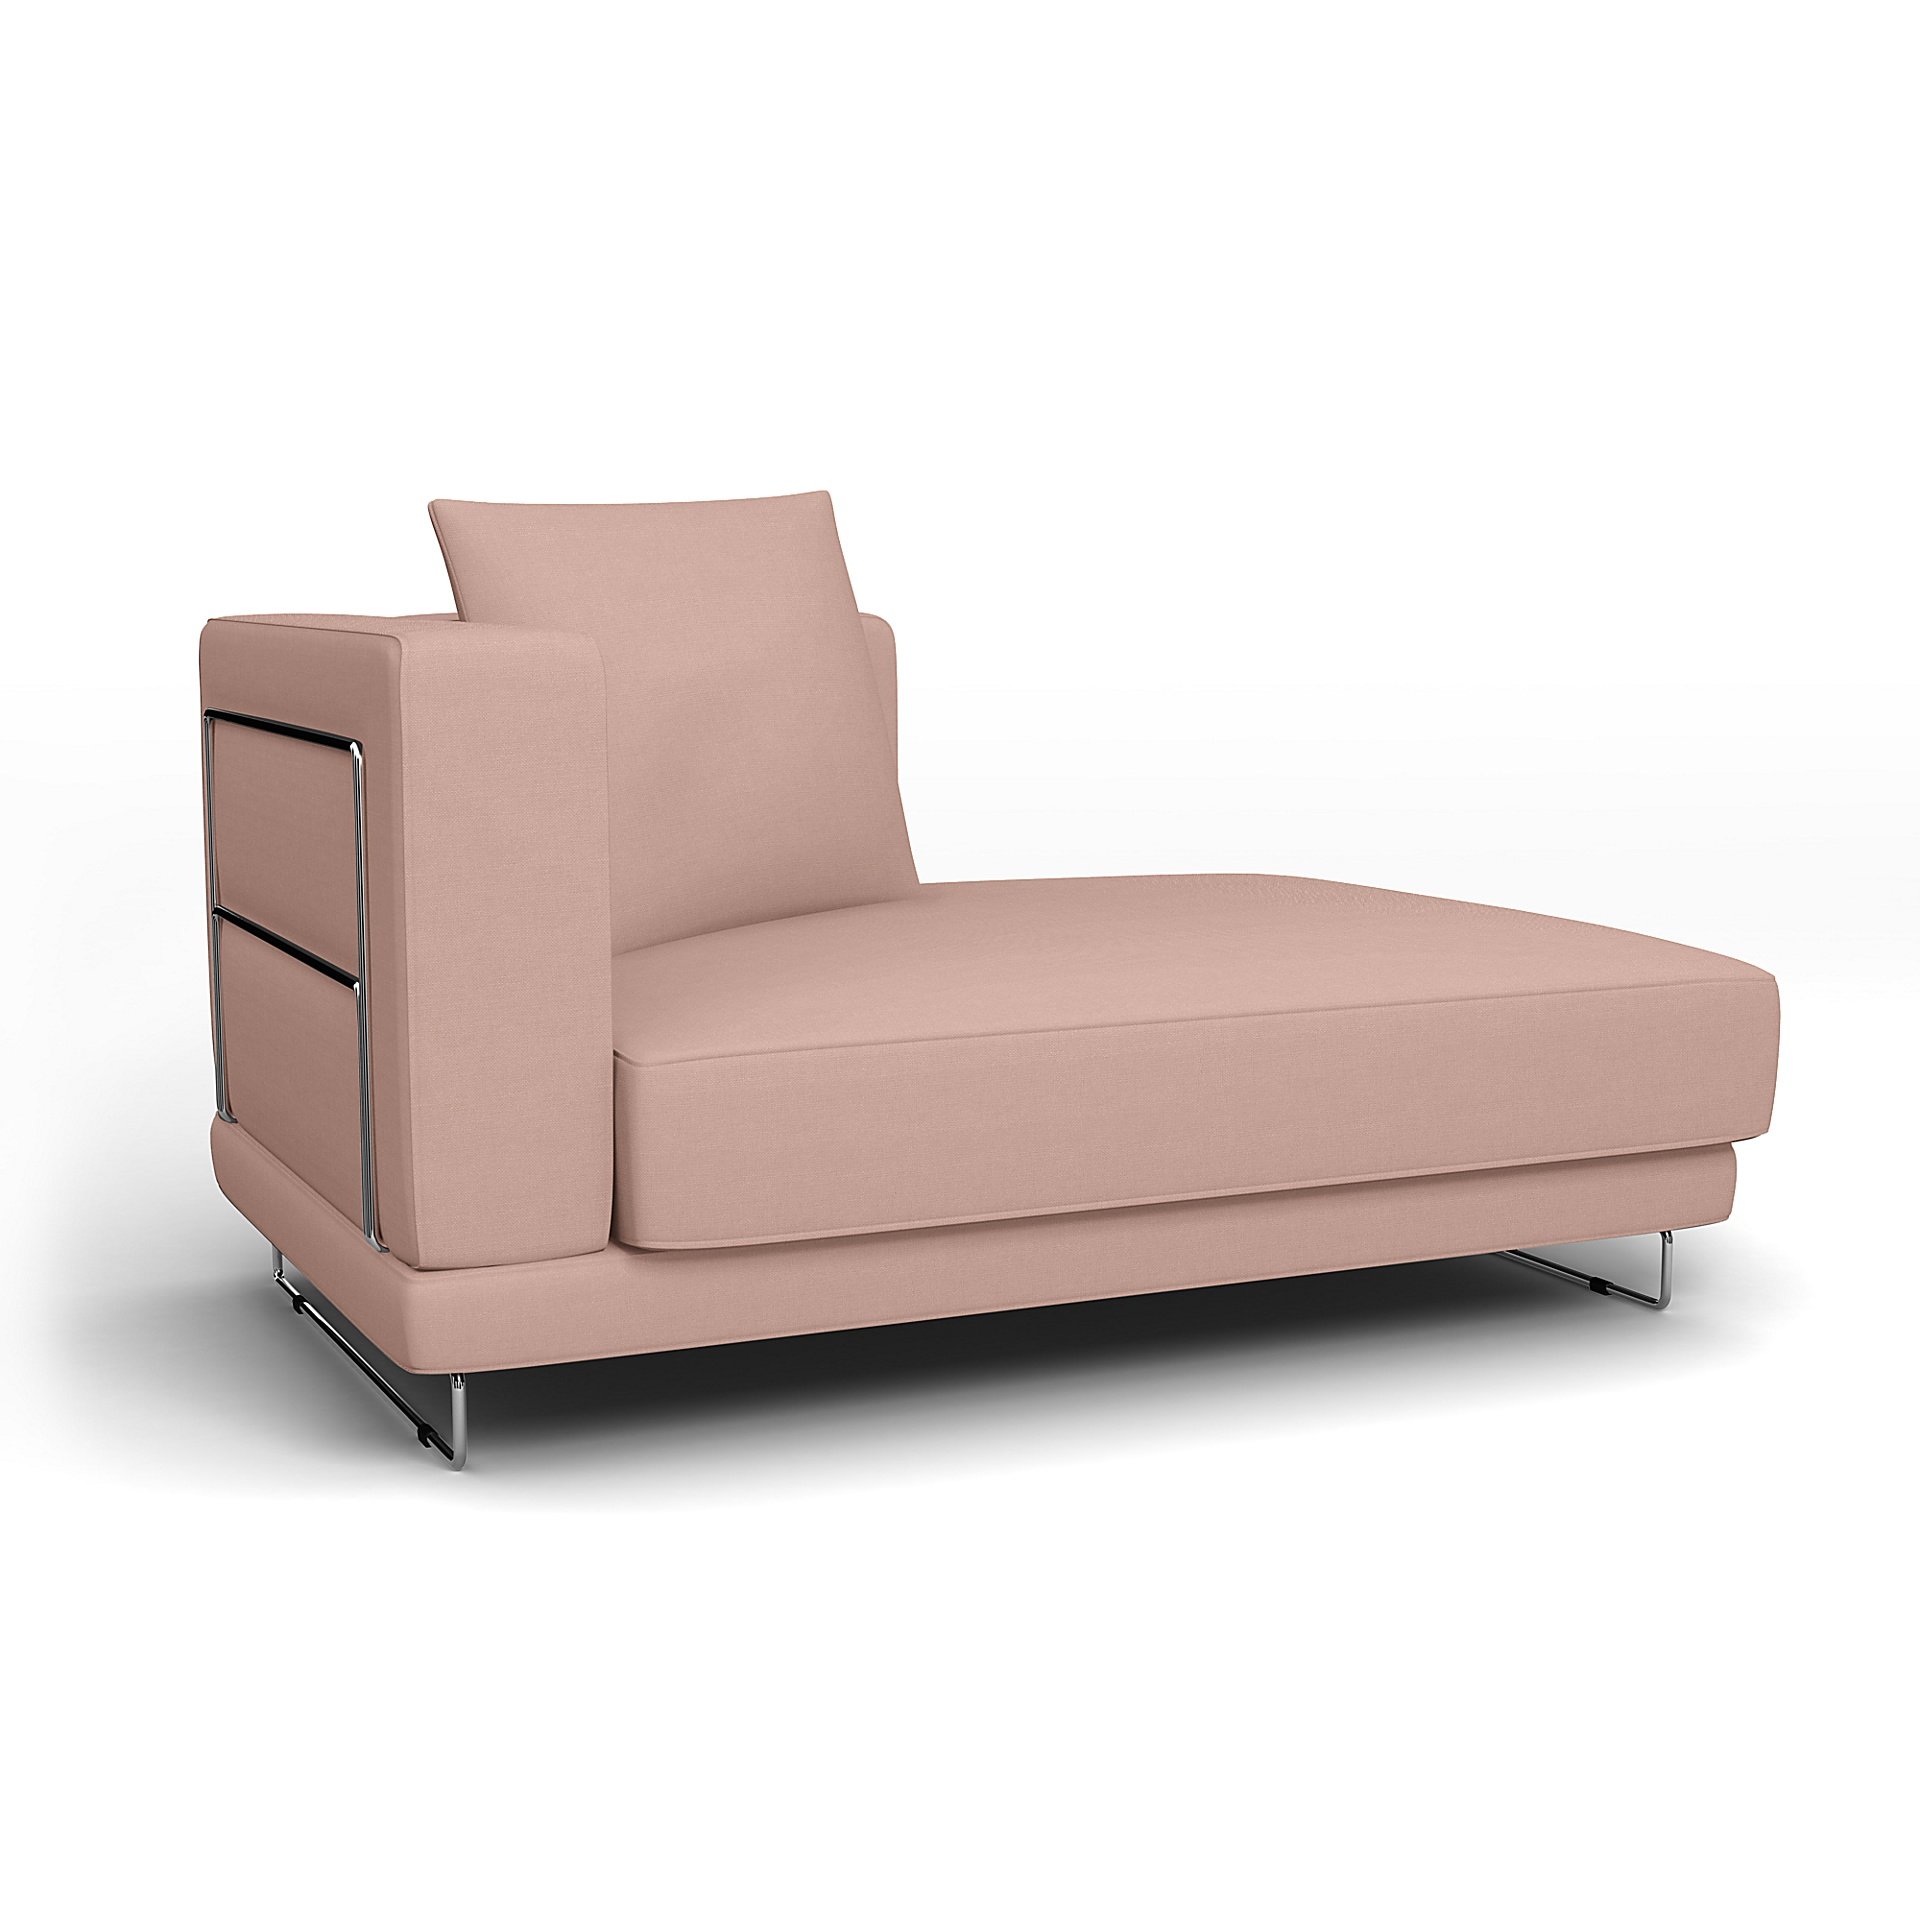 IKEA - Tylosand Chaise with Right Armrest Cover, Blush, Linen - Bemz